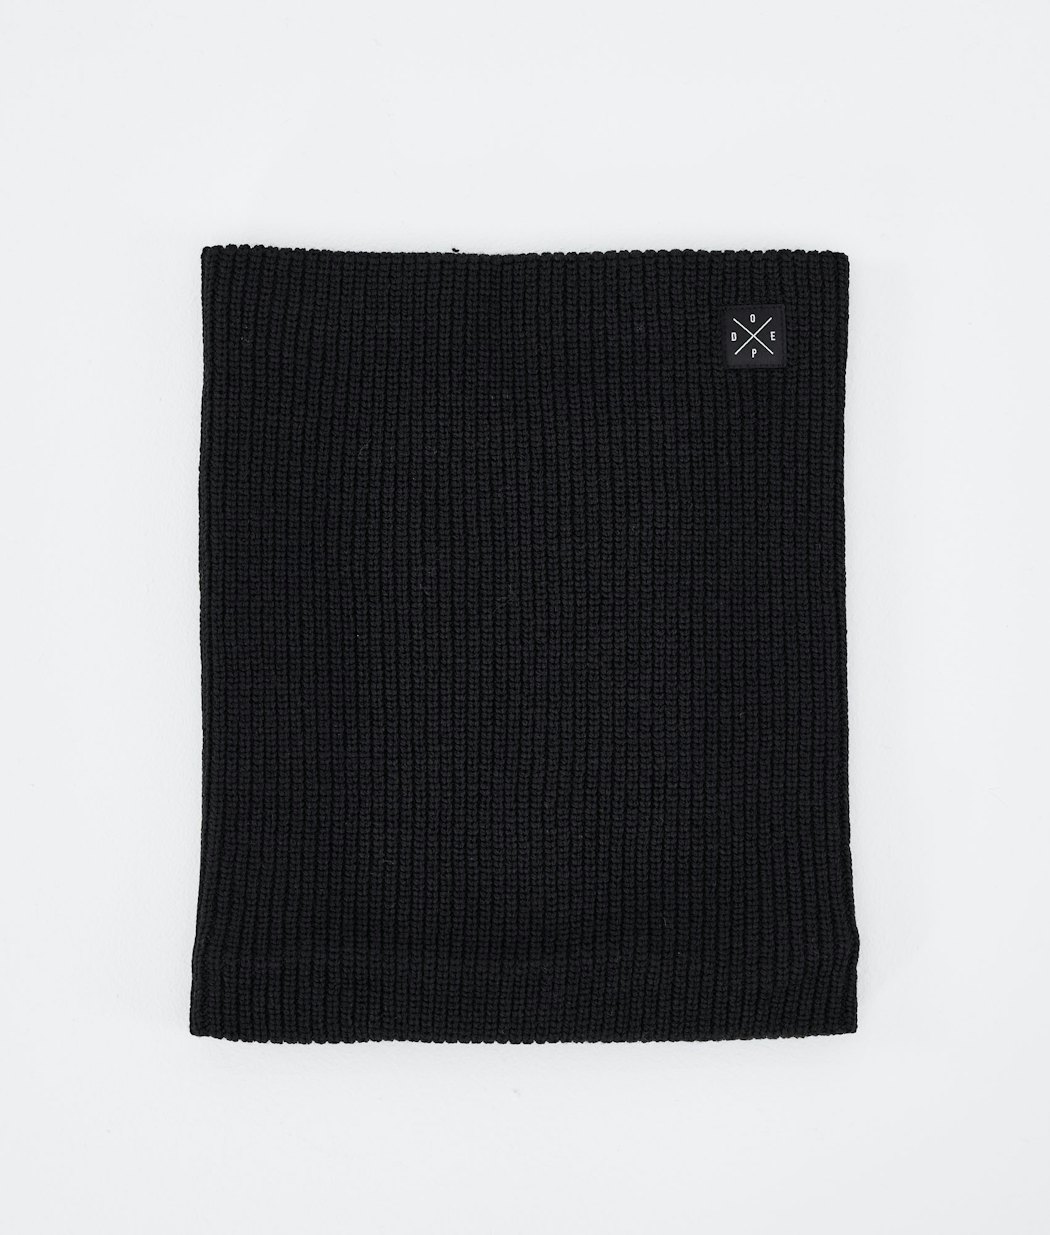 Dope 2X-UP Knitted Tour de cou Homme Black